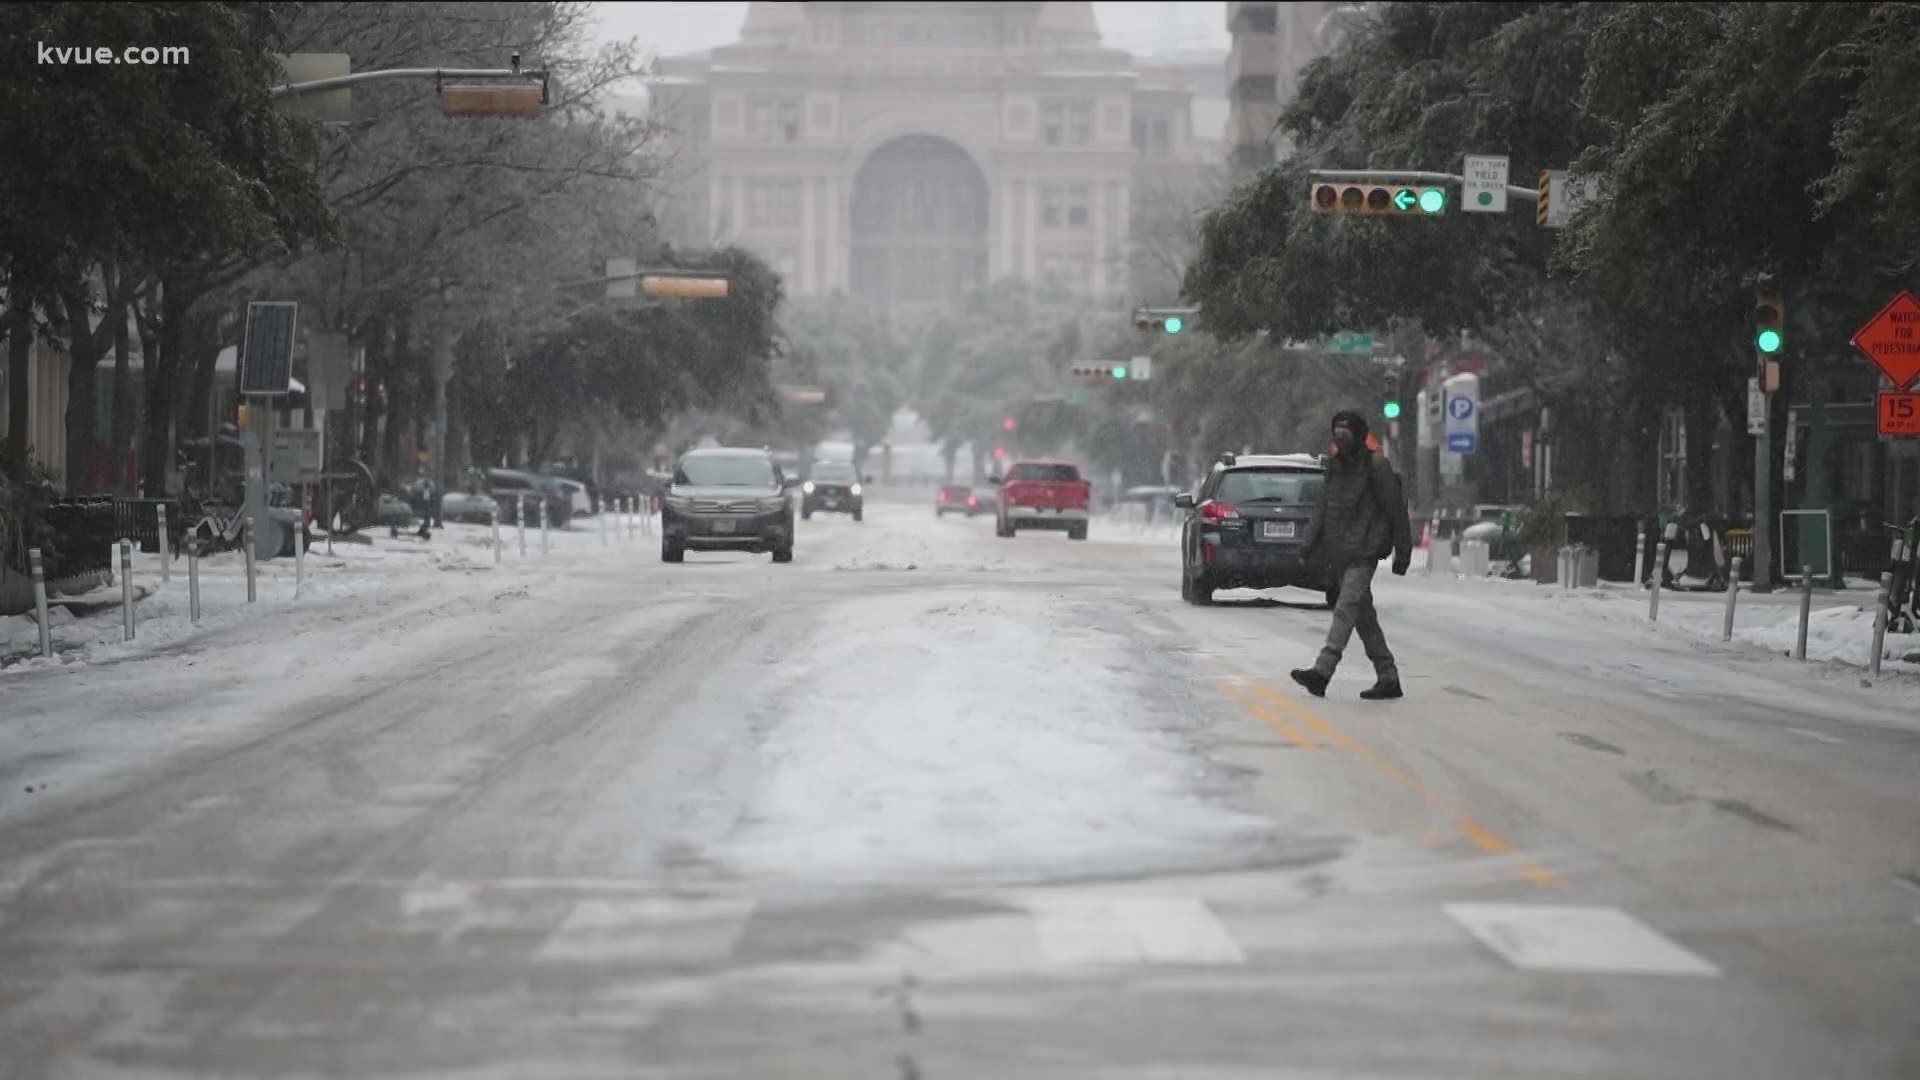 New reforms are coming to the Texas power grid after Gov. Greg Abbott signed two bills making changes after the state's failure during the winter storms.